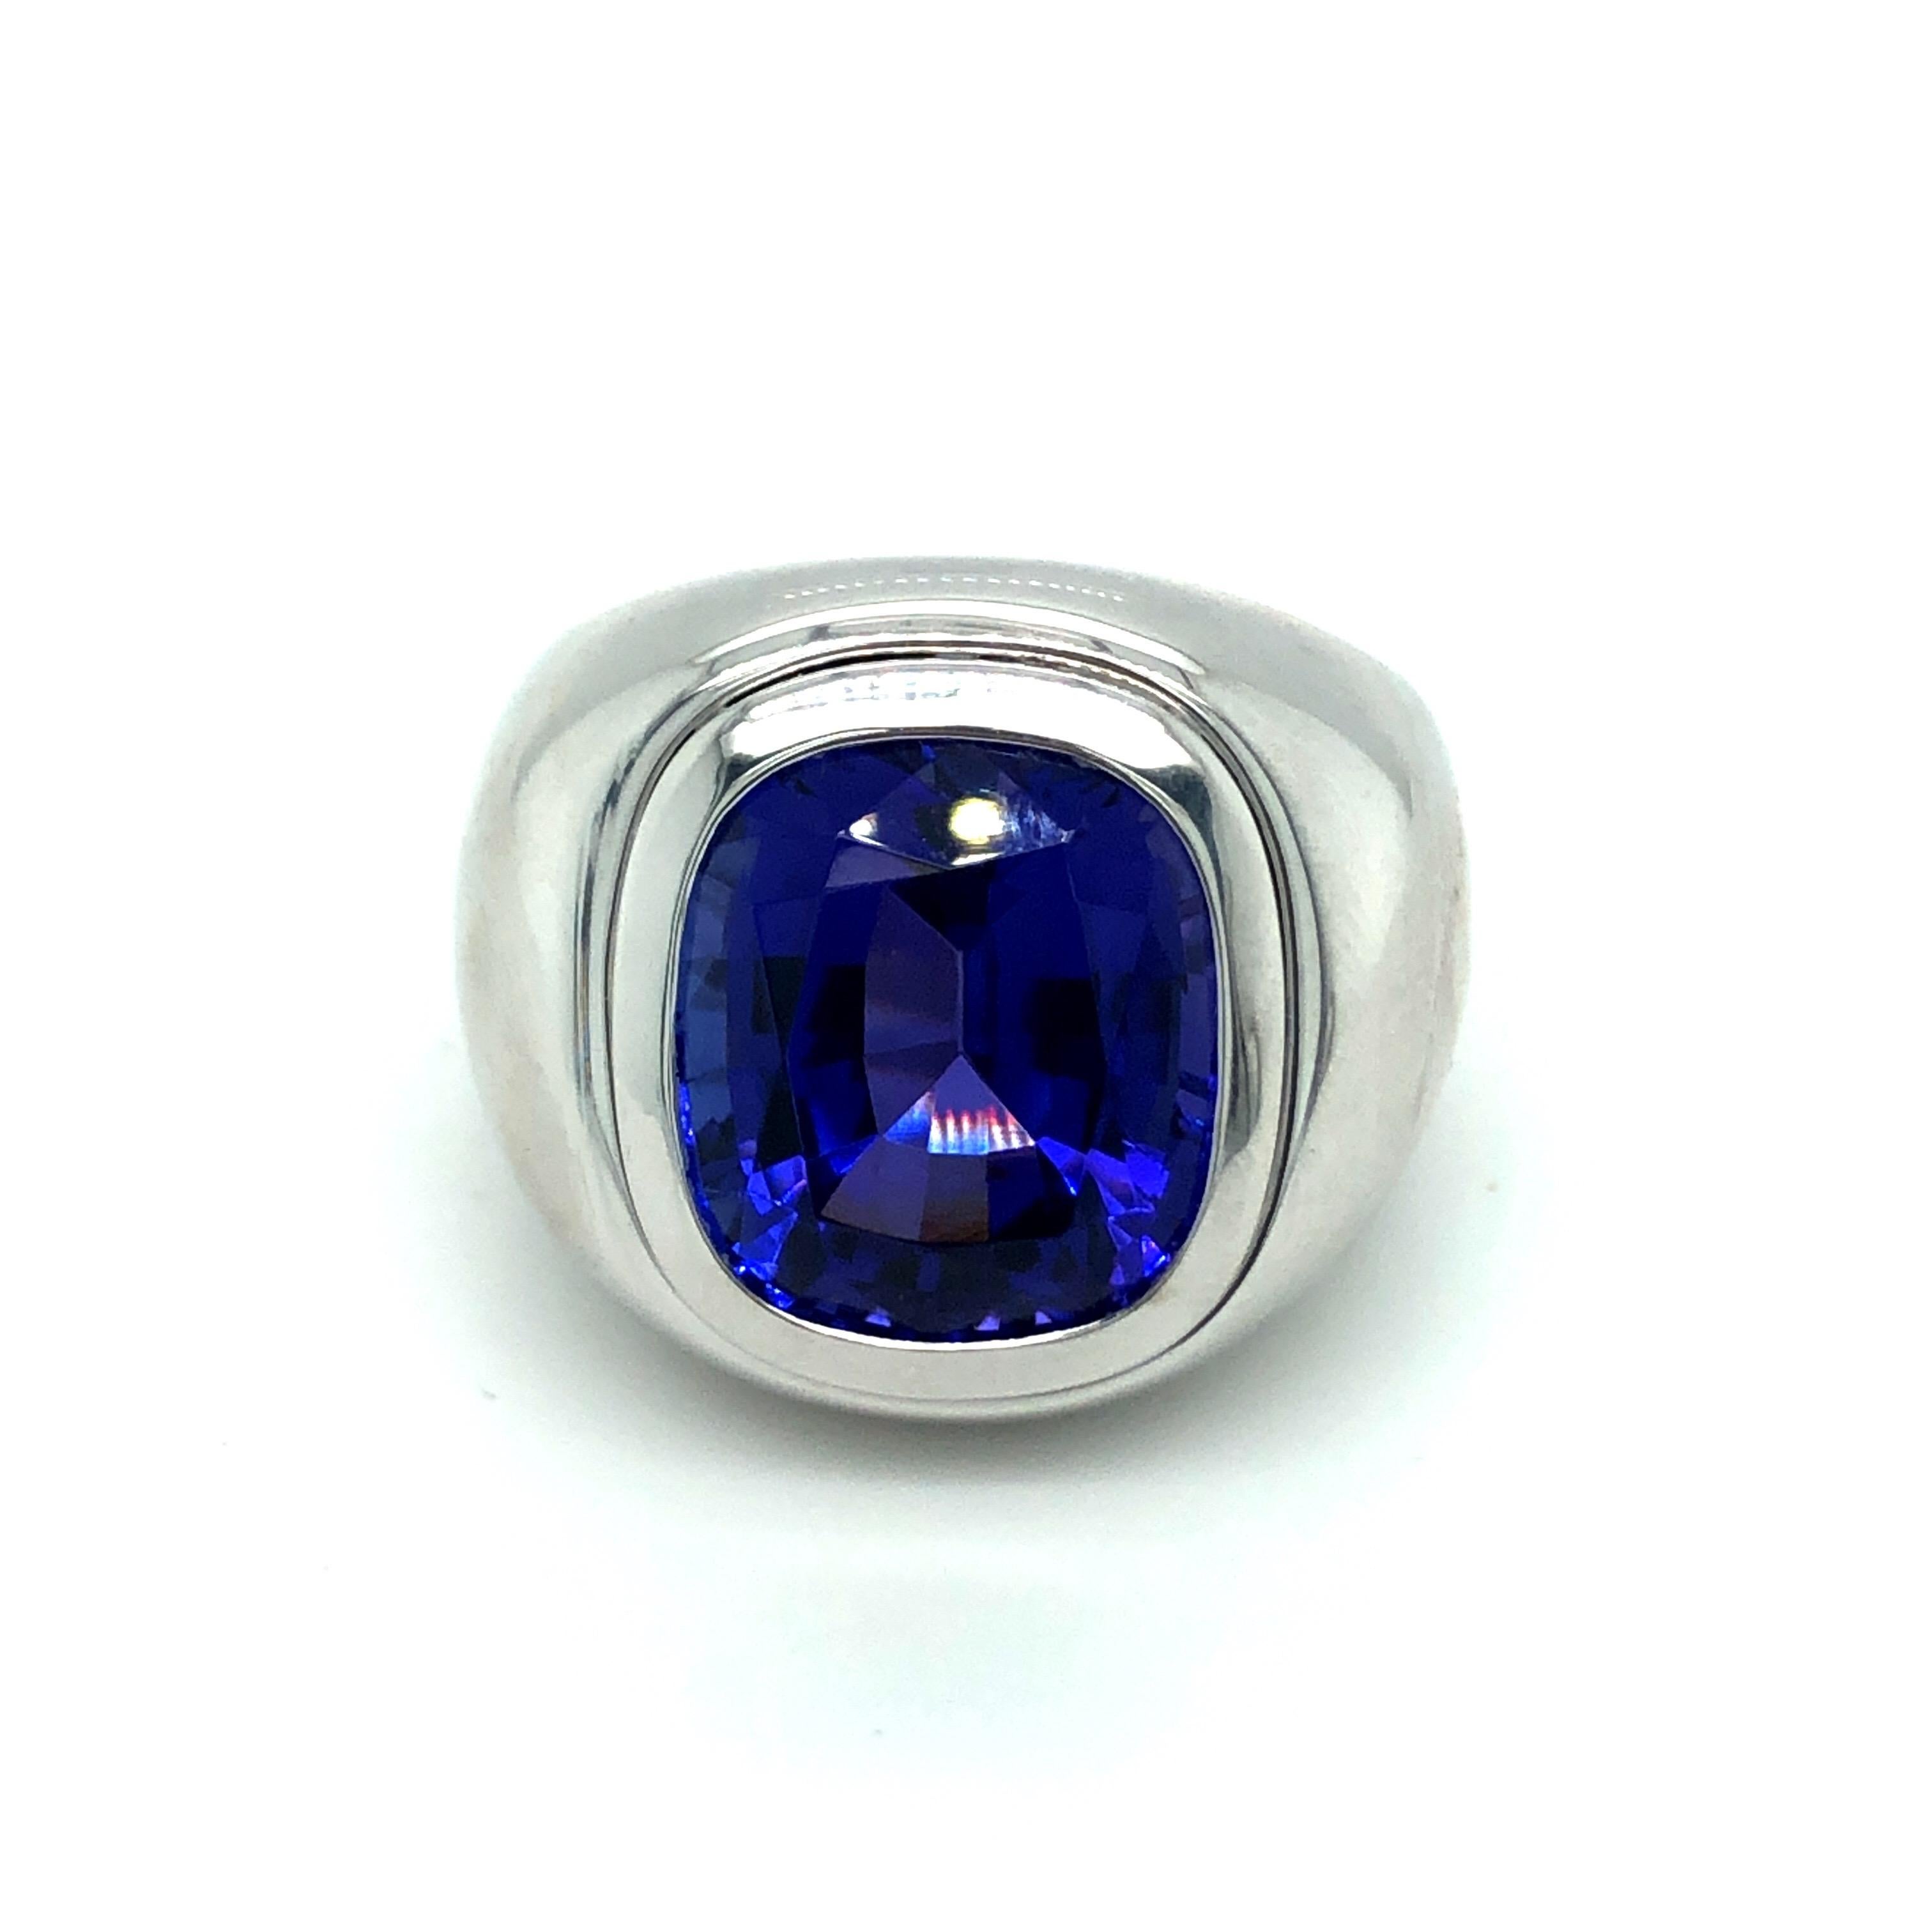 Impressive 18 karat white gold and tanzanite signet ring by the renowned Swiss jeweler Bucherer.
This statement ring features a lively violetish blue tanzanite of impeccable quality weighing 14.7 carats. The bold mounting is crafted in 18 karat